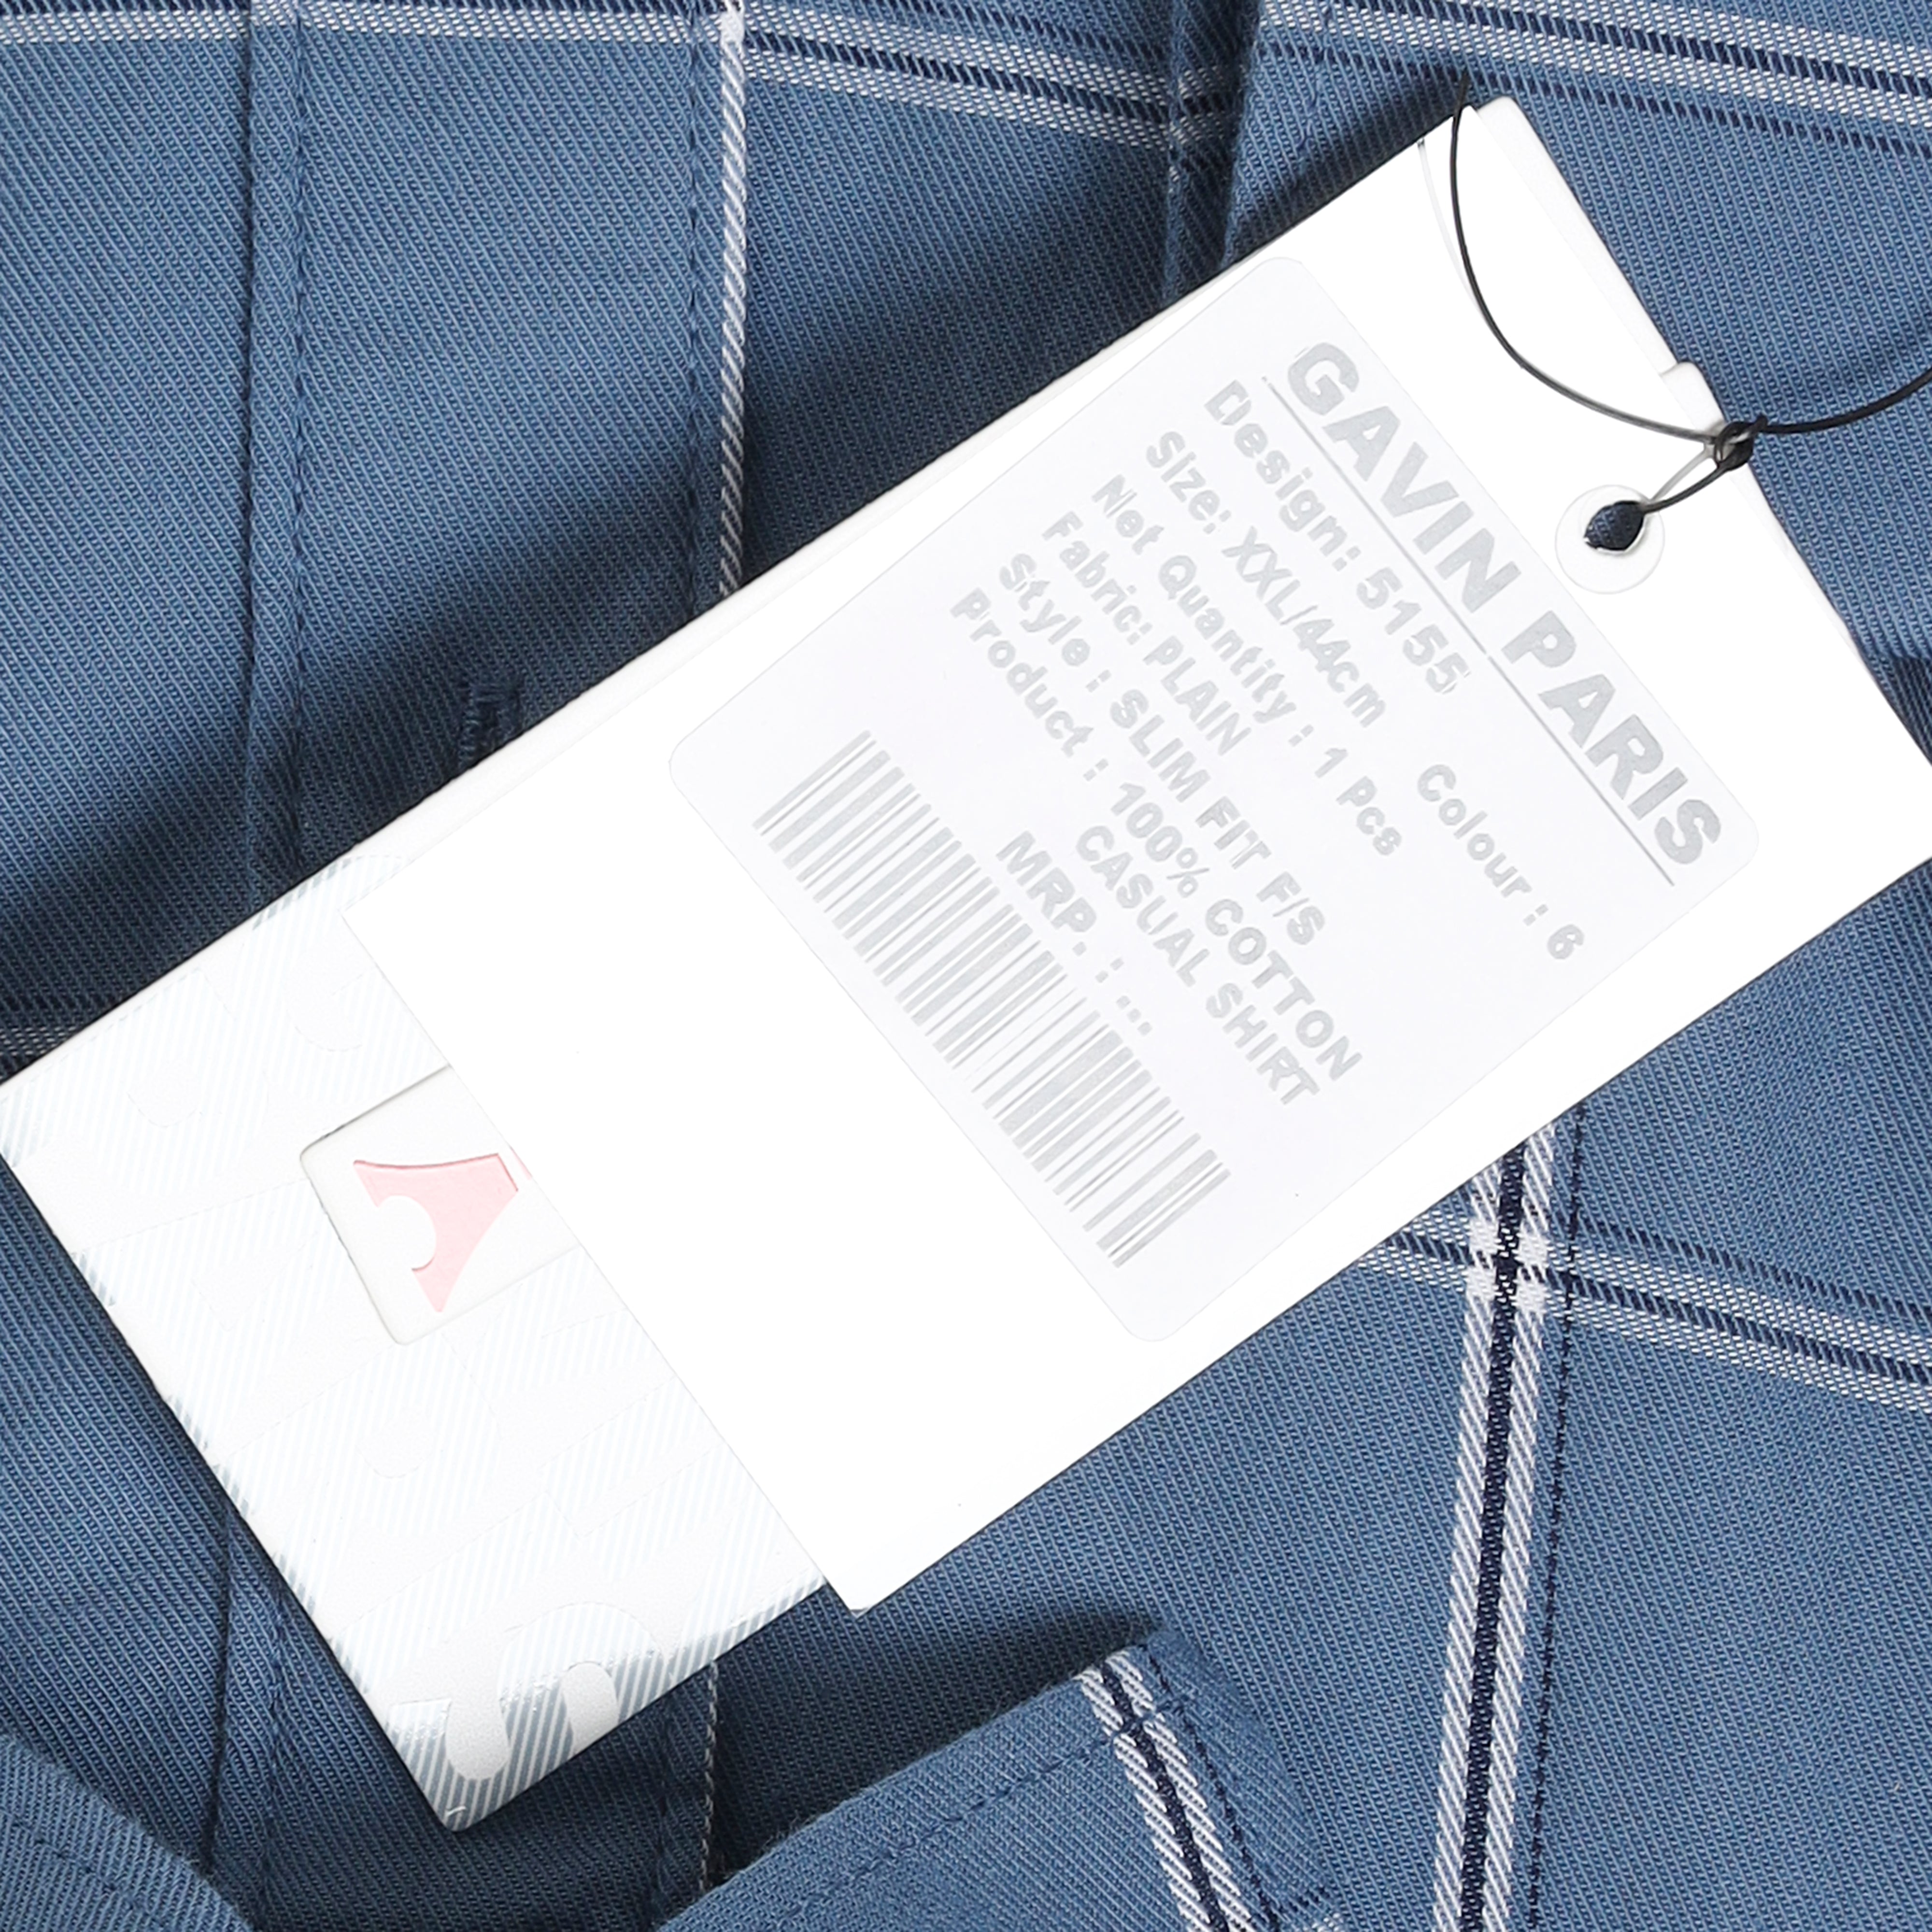 MEN FRENCH BLUE WHITE CHECKED FLANNEL SHIRT (D009)